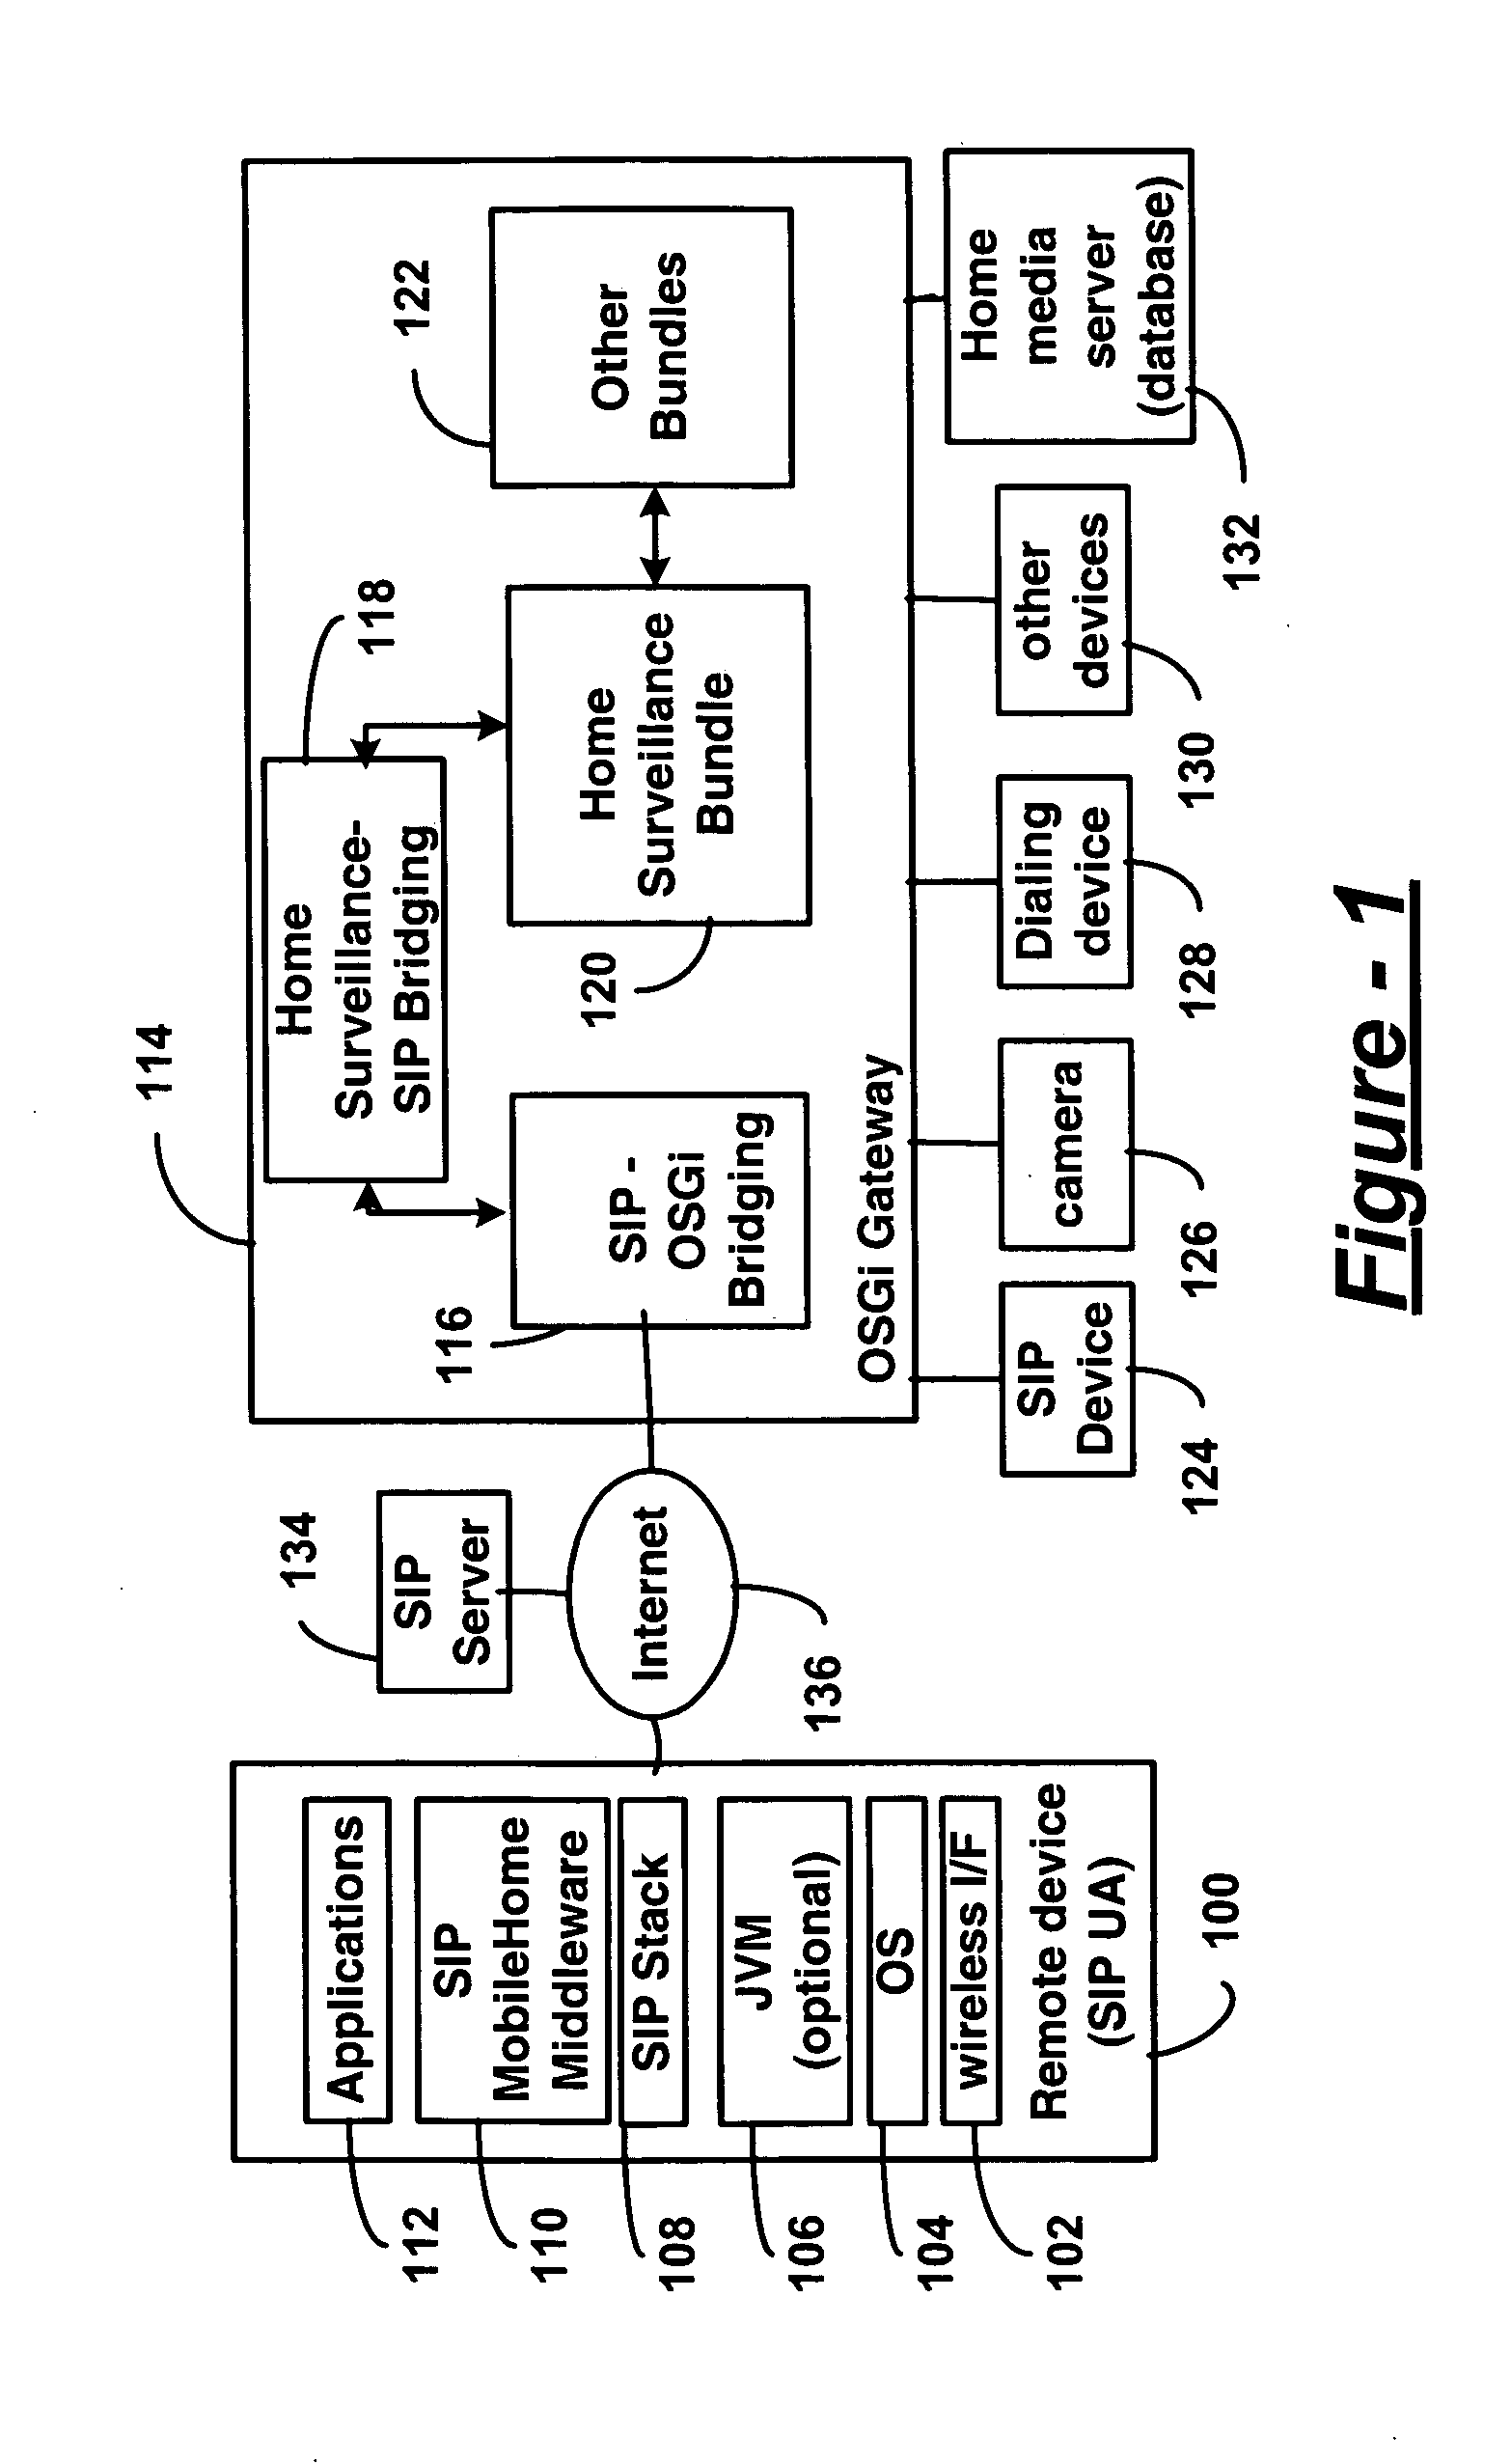 Networked home surveillance architecture for a portable or remote monitoring device